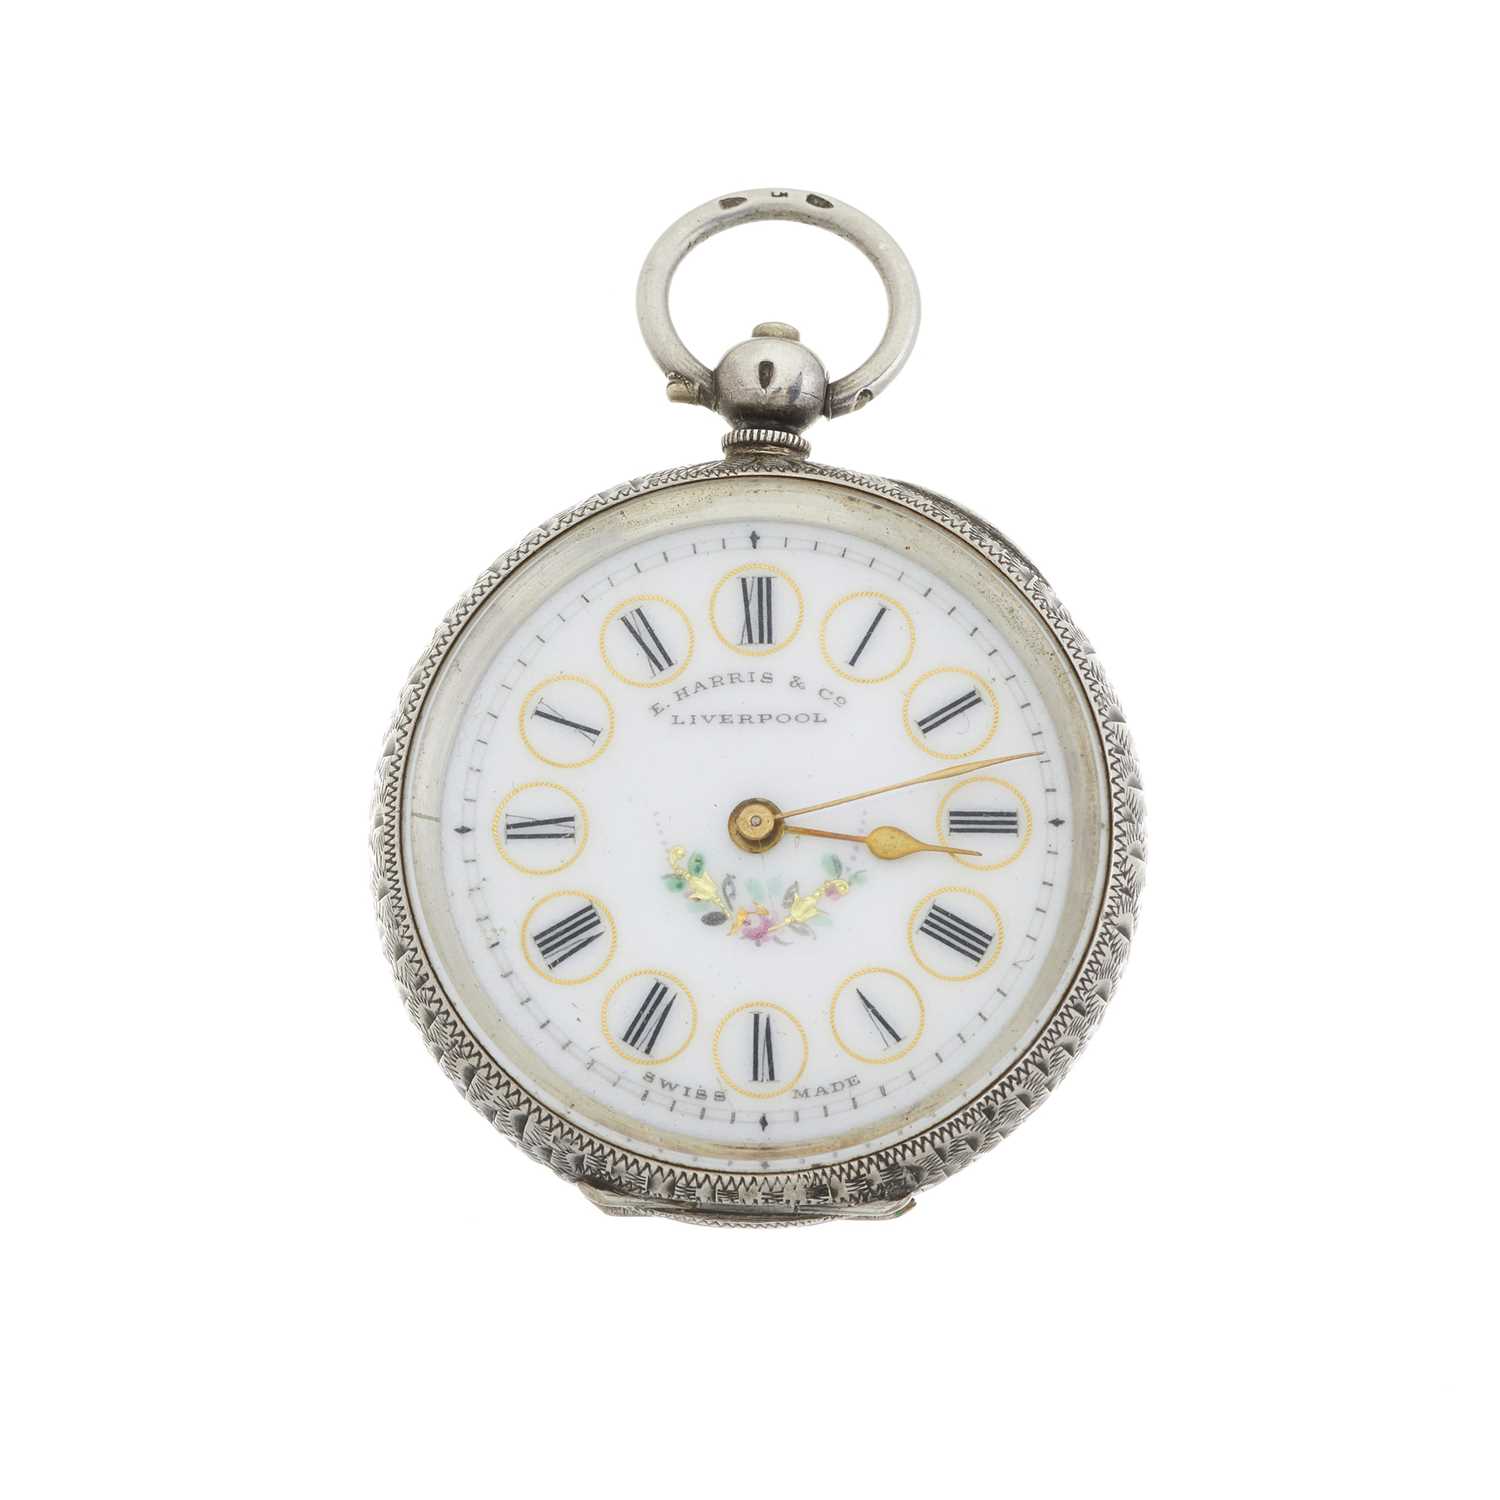 E. Harris & Co., Liverpool, a 19th century silver and enamel open face pocket watch